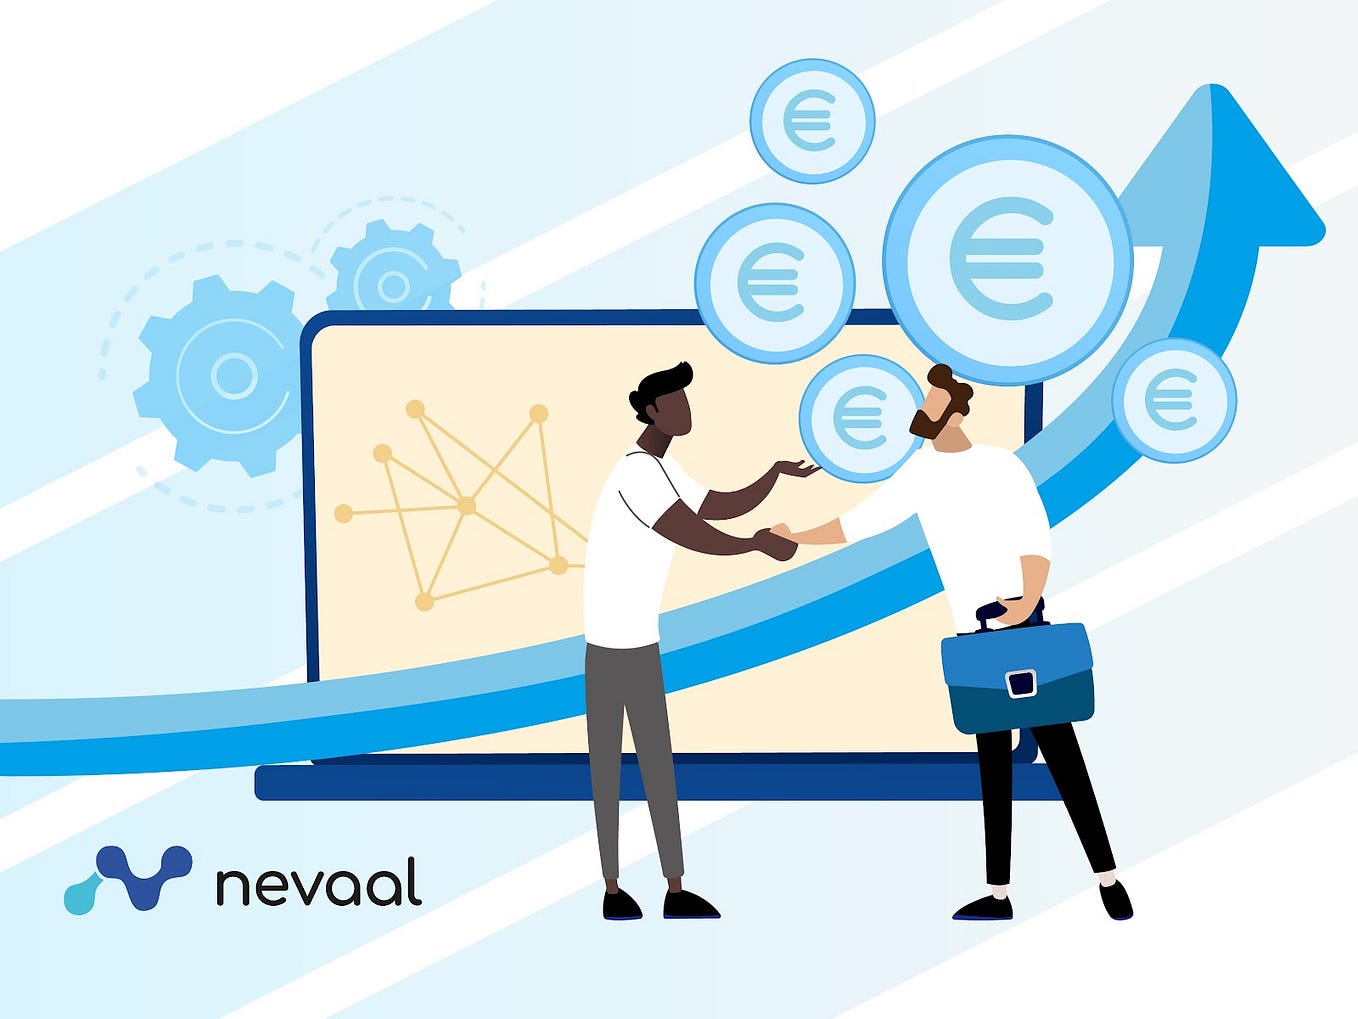 nevaal maps for VC deal sourcing